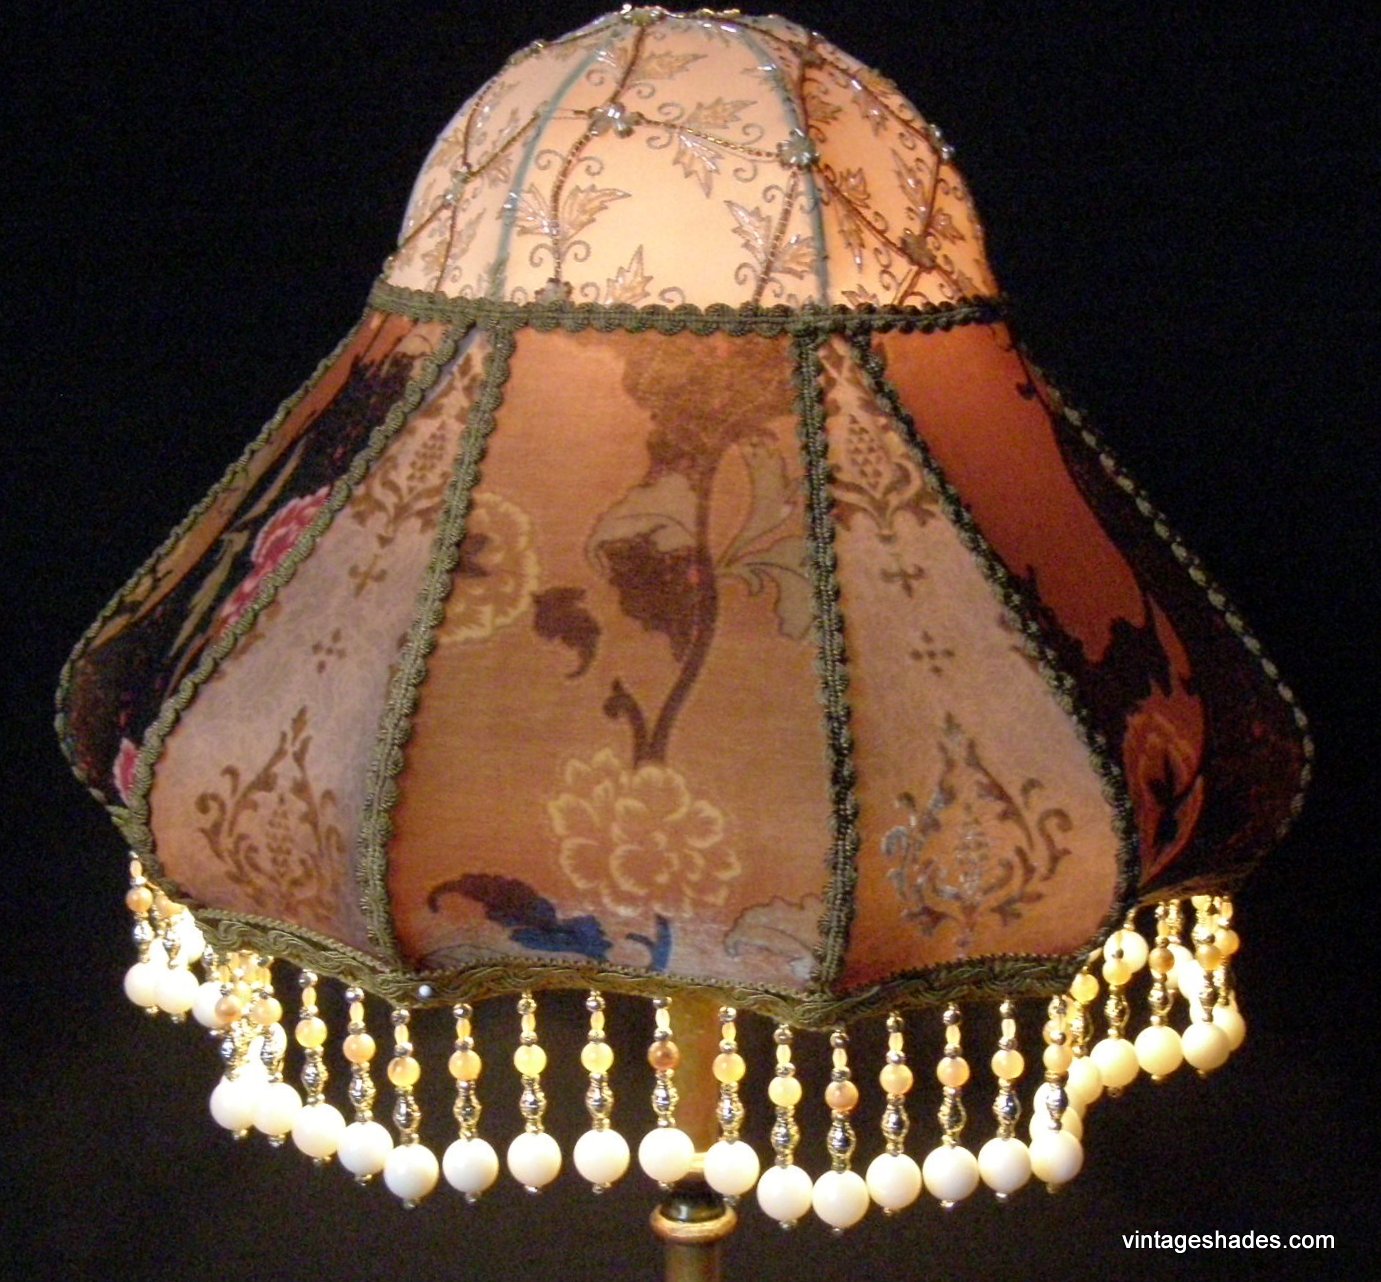 ANTIQUE LAMP VICTORIAN SHADE FOR FLOOR LAMP